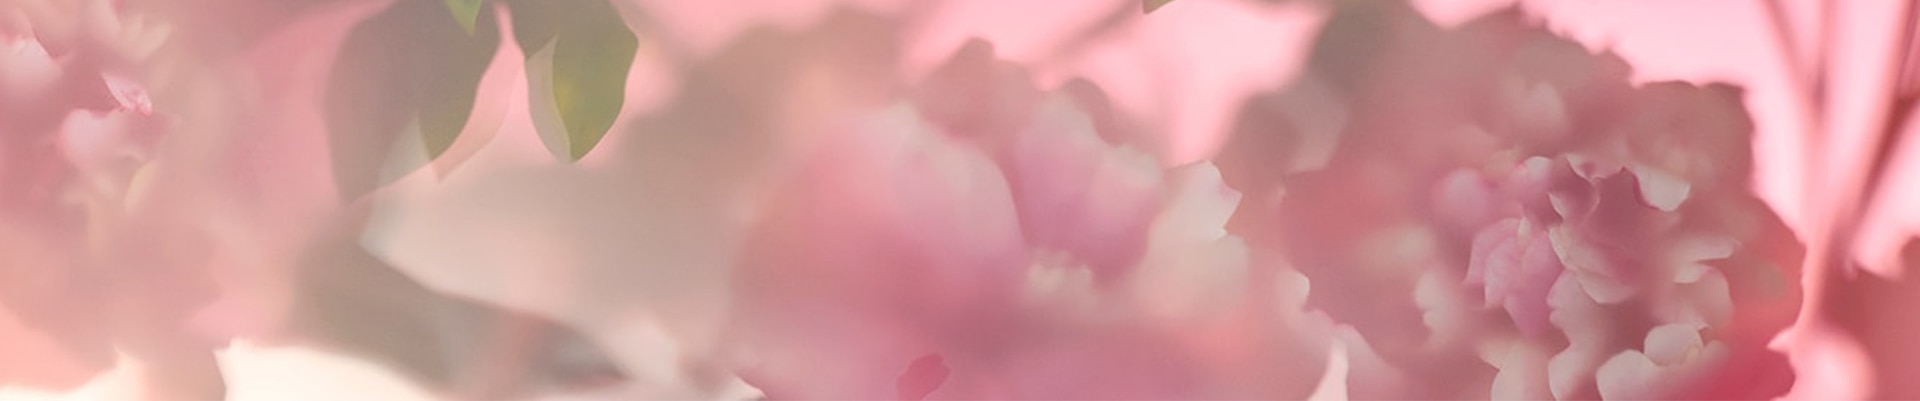 image of peony petals, an ingredient in jo malone floral perfumes, on a pink background